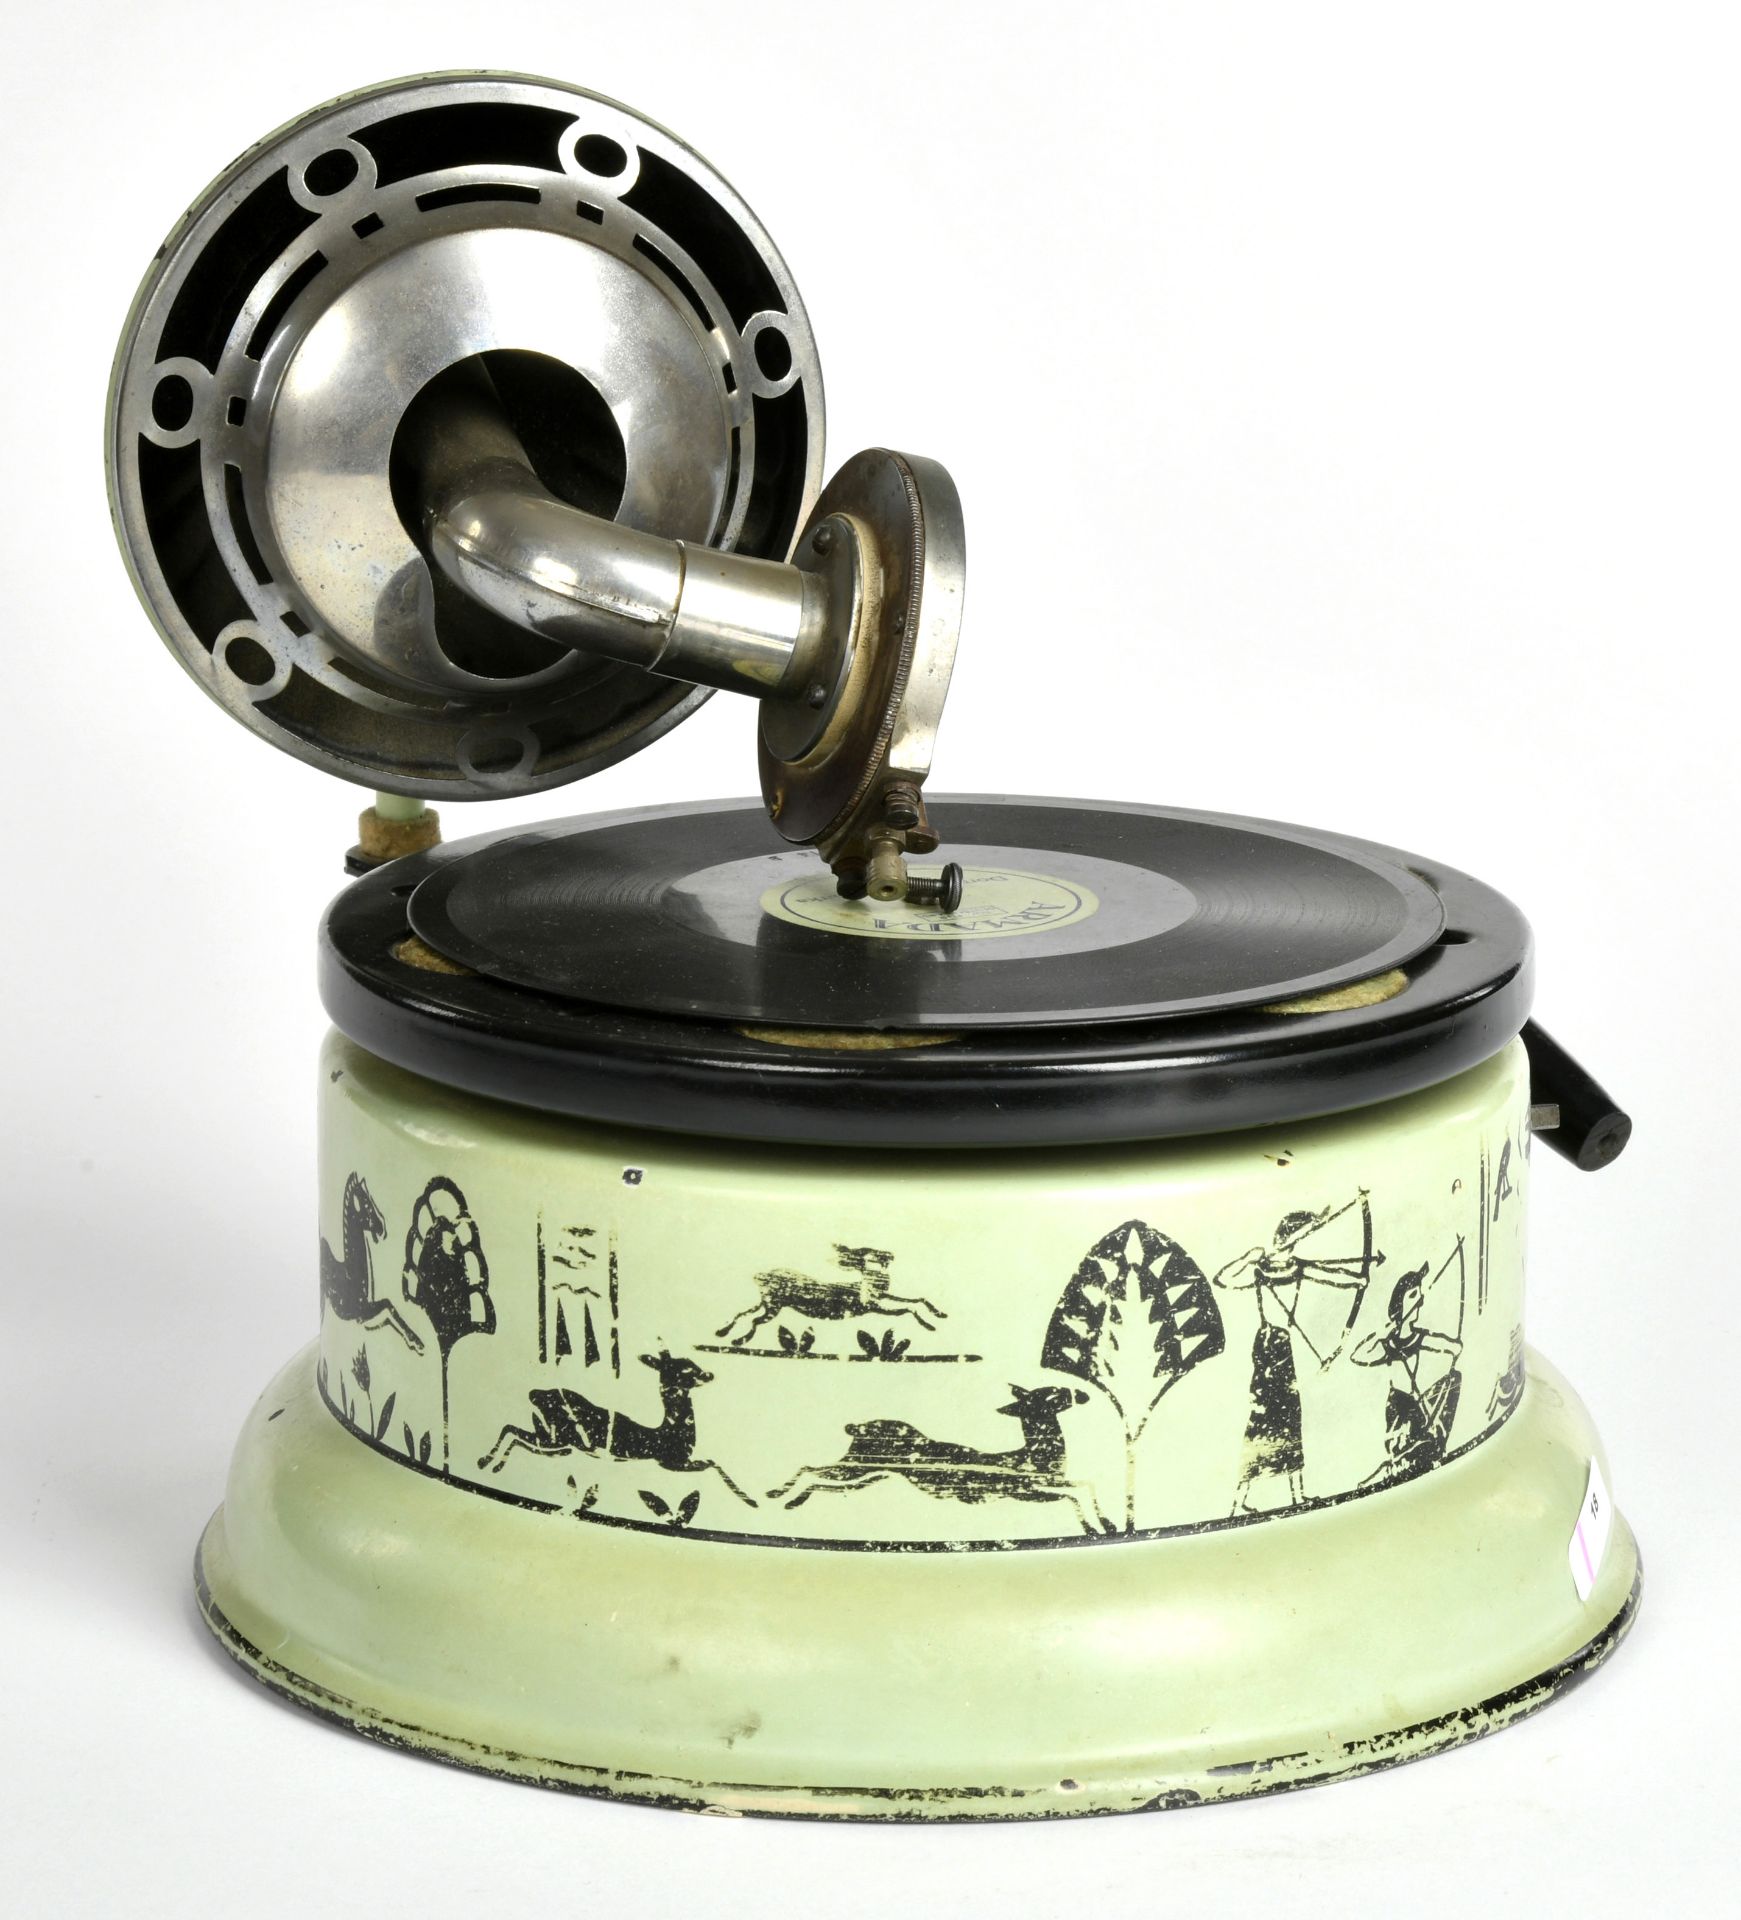 Kids gramophone with Egyptian motives, Germany pw, 22cm, funct. ok, min. paint d., C 2- - Image 2 of 2